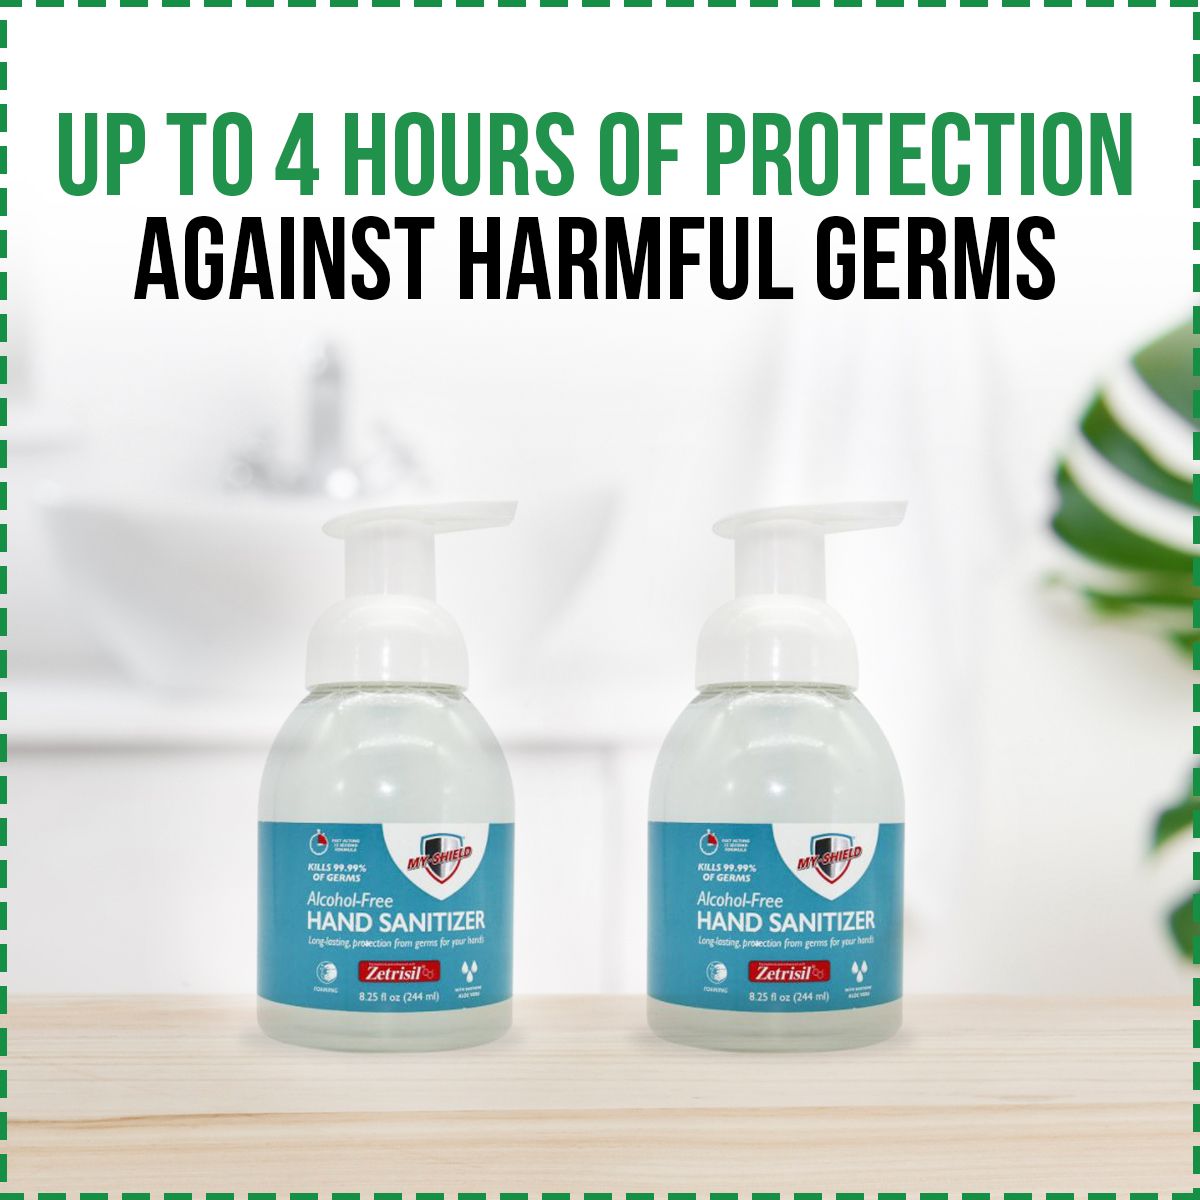 Up to 4 hours of protection against harmful germs